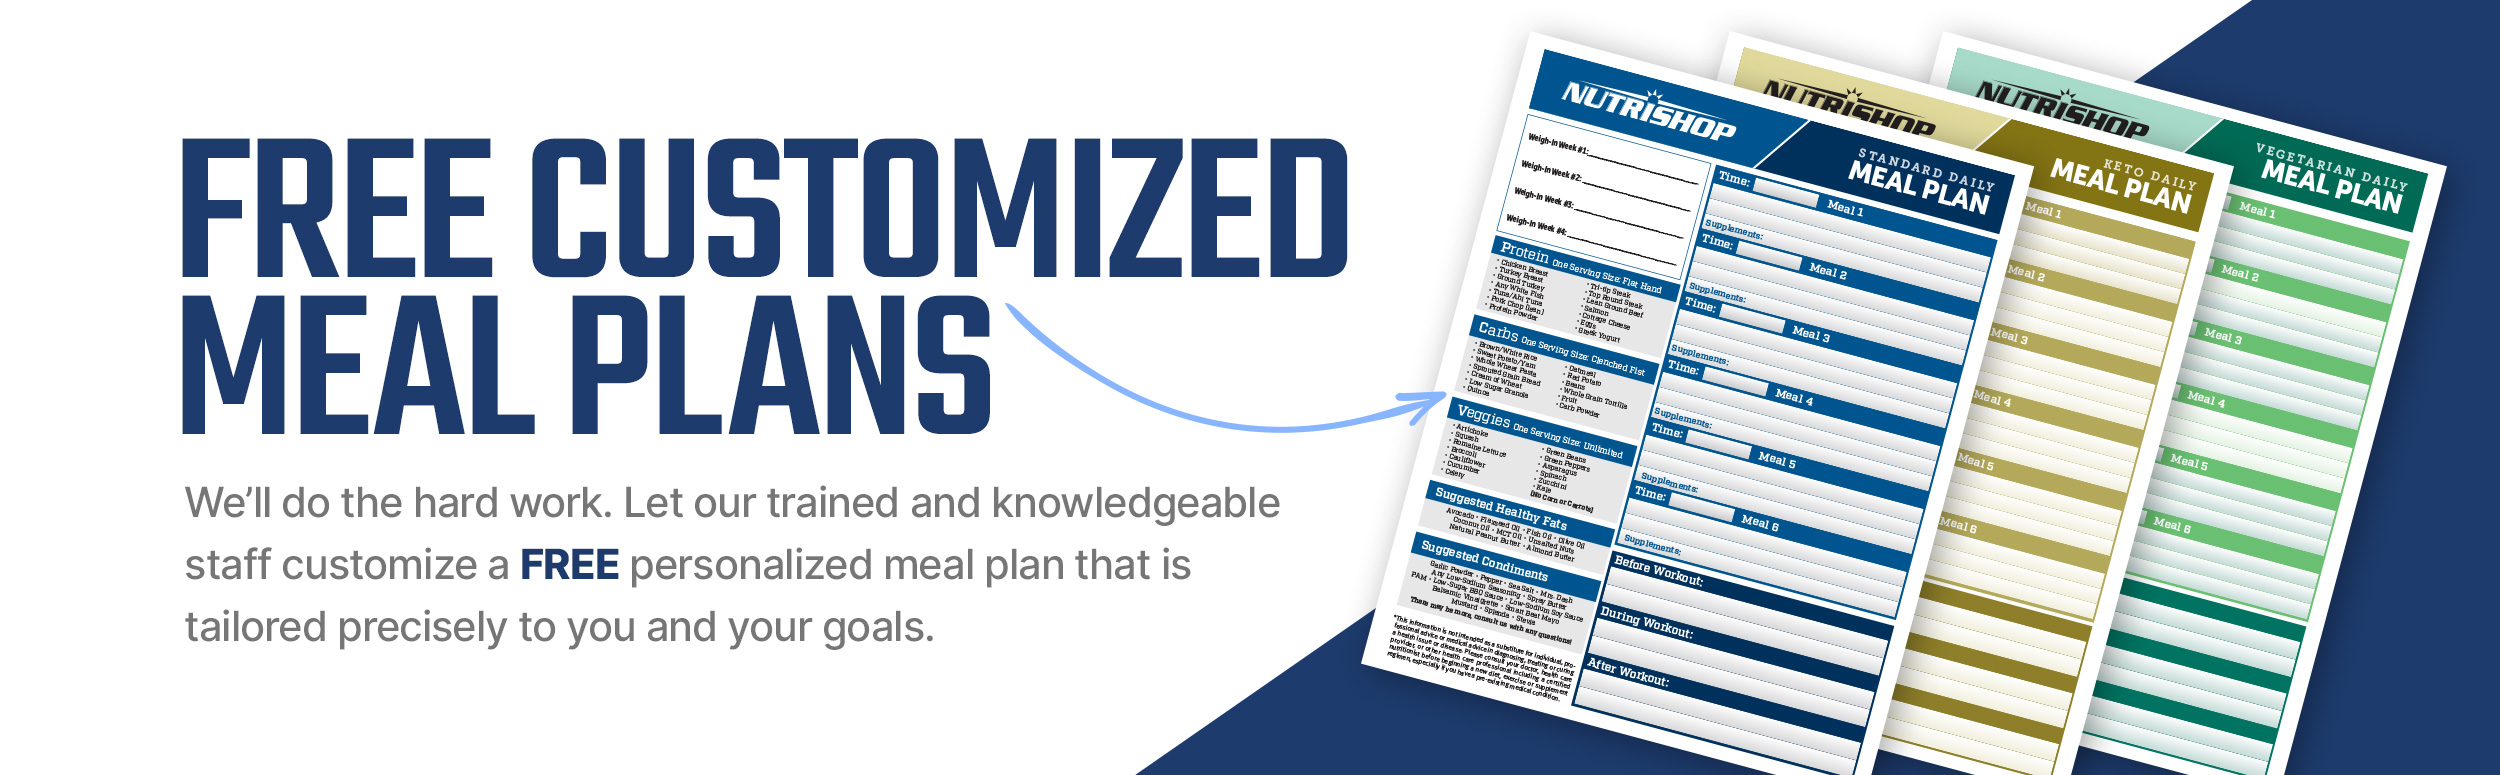 Free Meal Plans banner